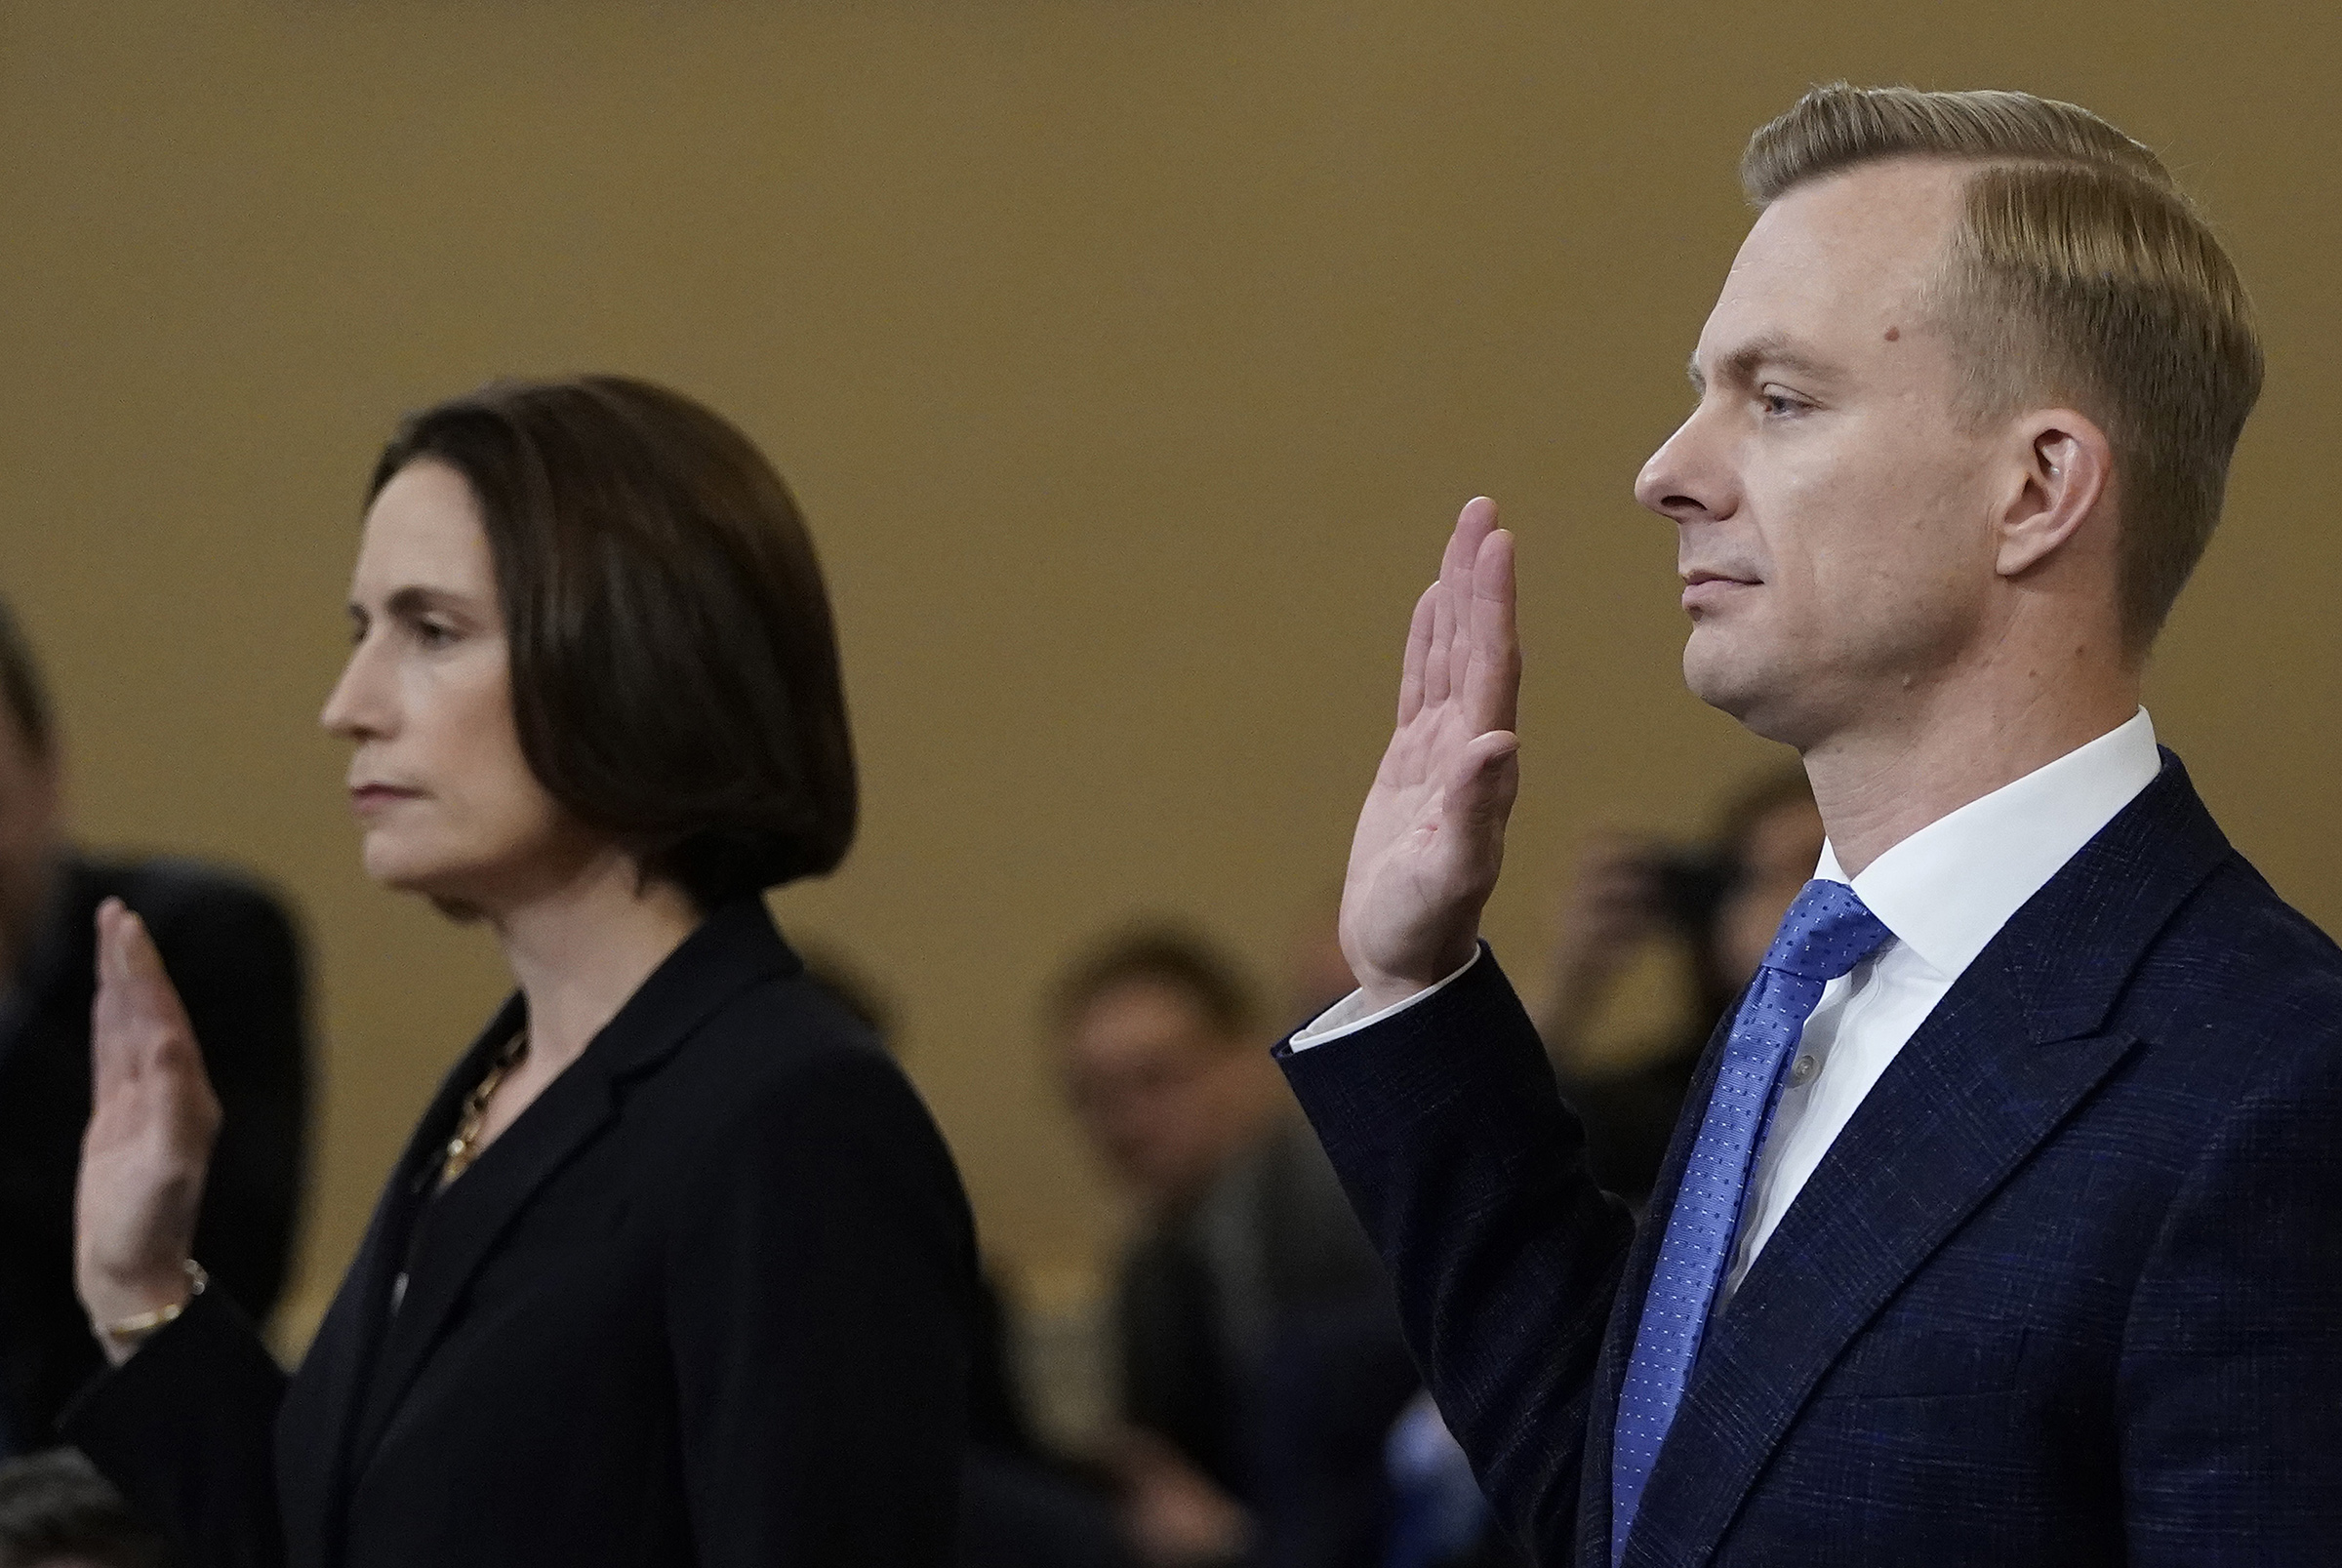 Fiona Hill, the National Security Council’s former senior director for Europe and Russia, and David Holmes, an official from the American embassy in Ukraine, are sworn in prior to testifying before the House Intelligence Committee on Capitol Hill on Nov. 21, 2019. (Win McNamee—Getty Images)